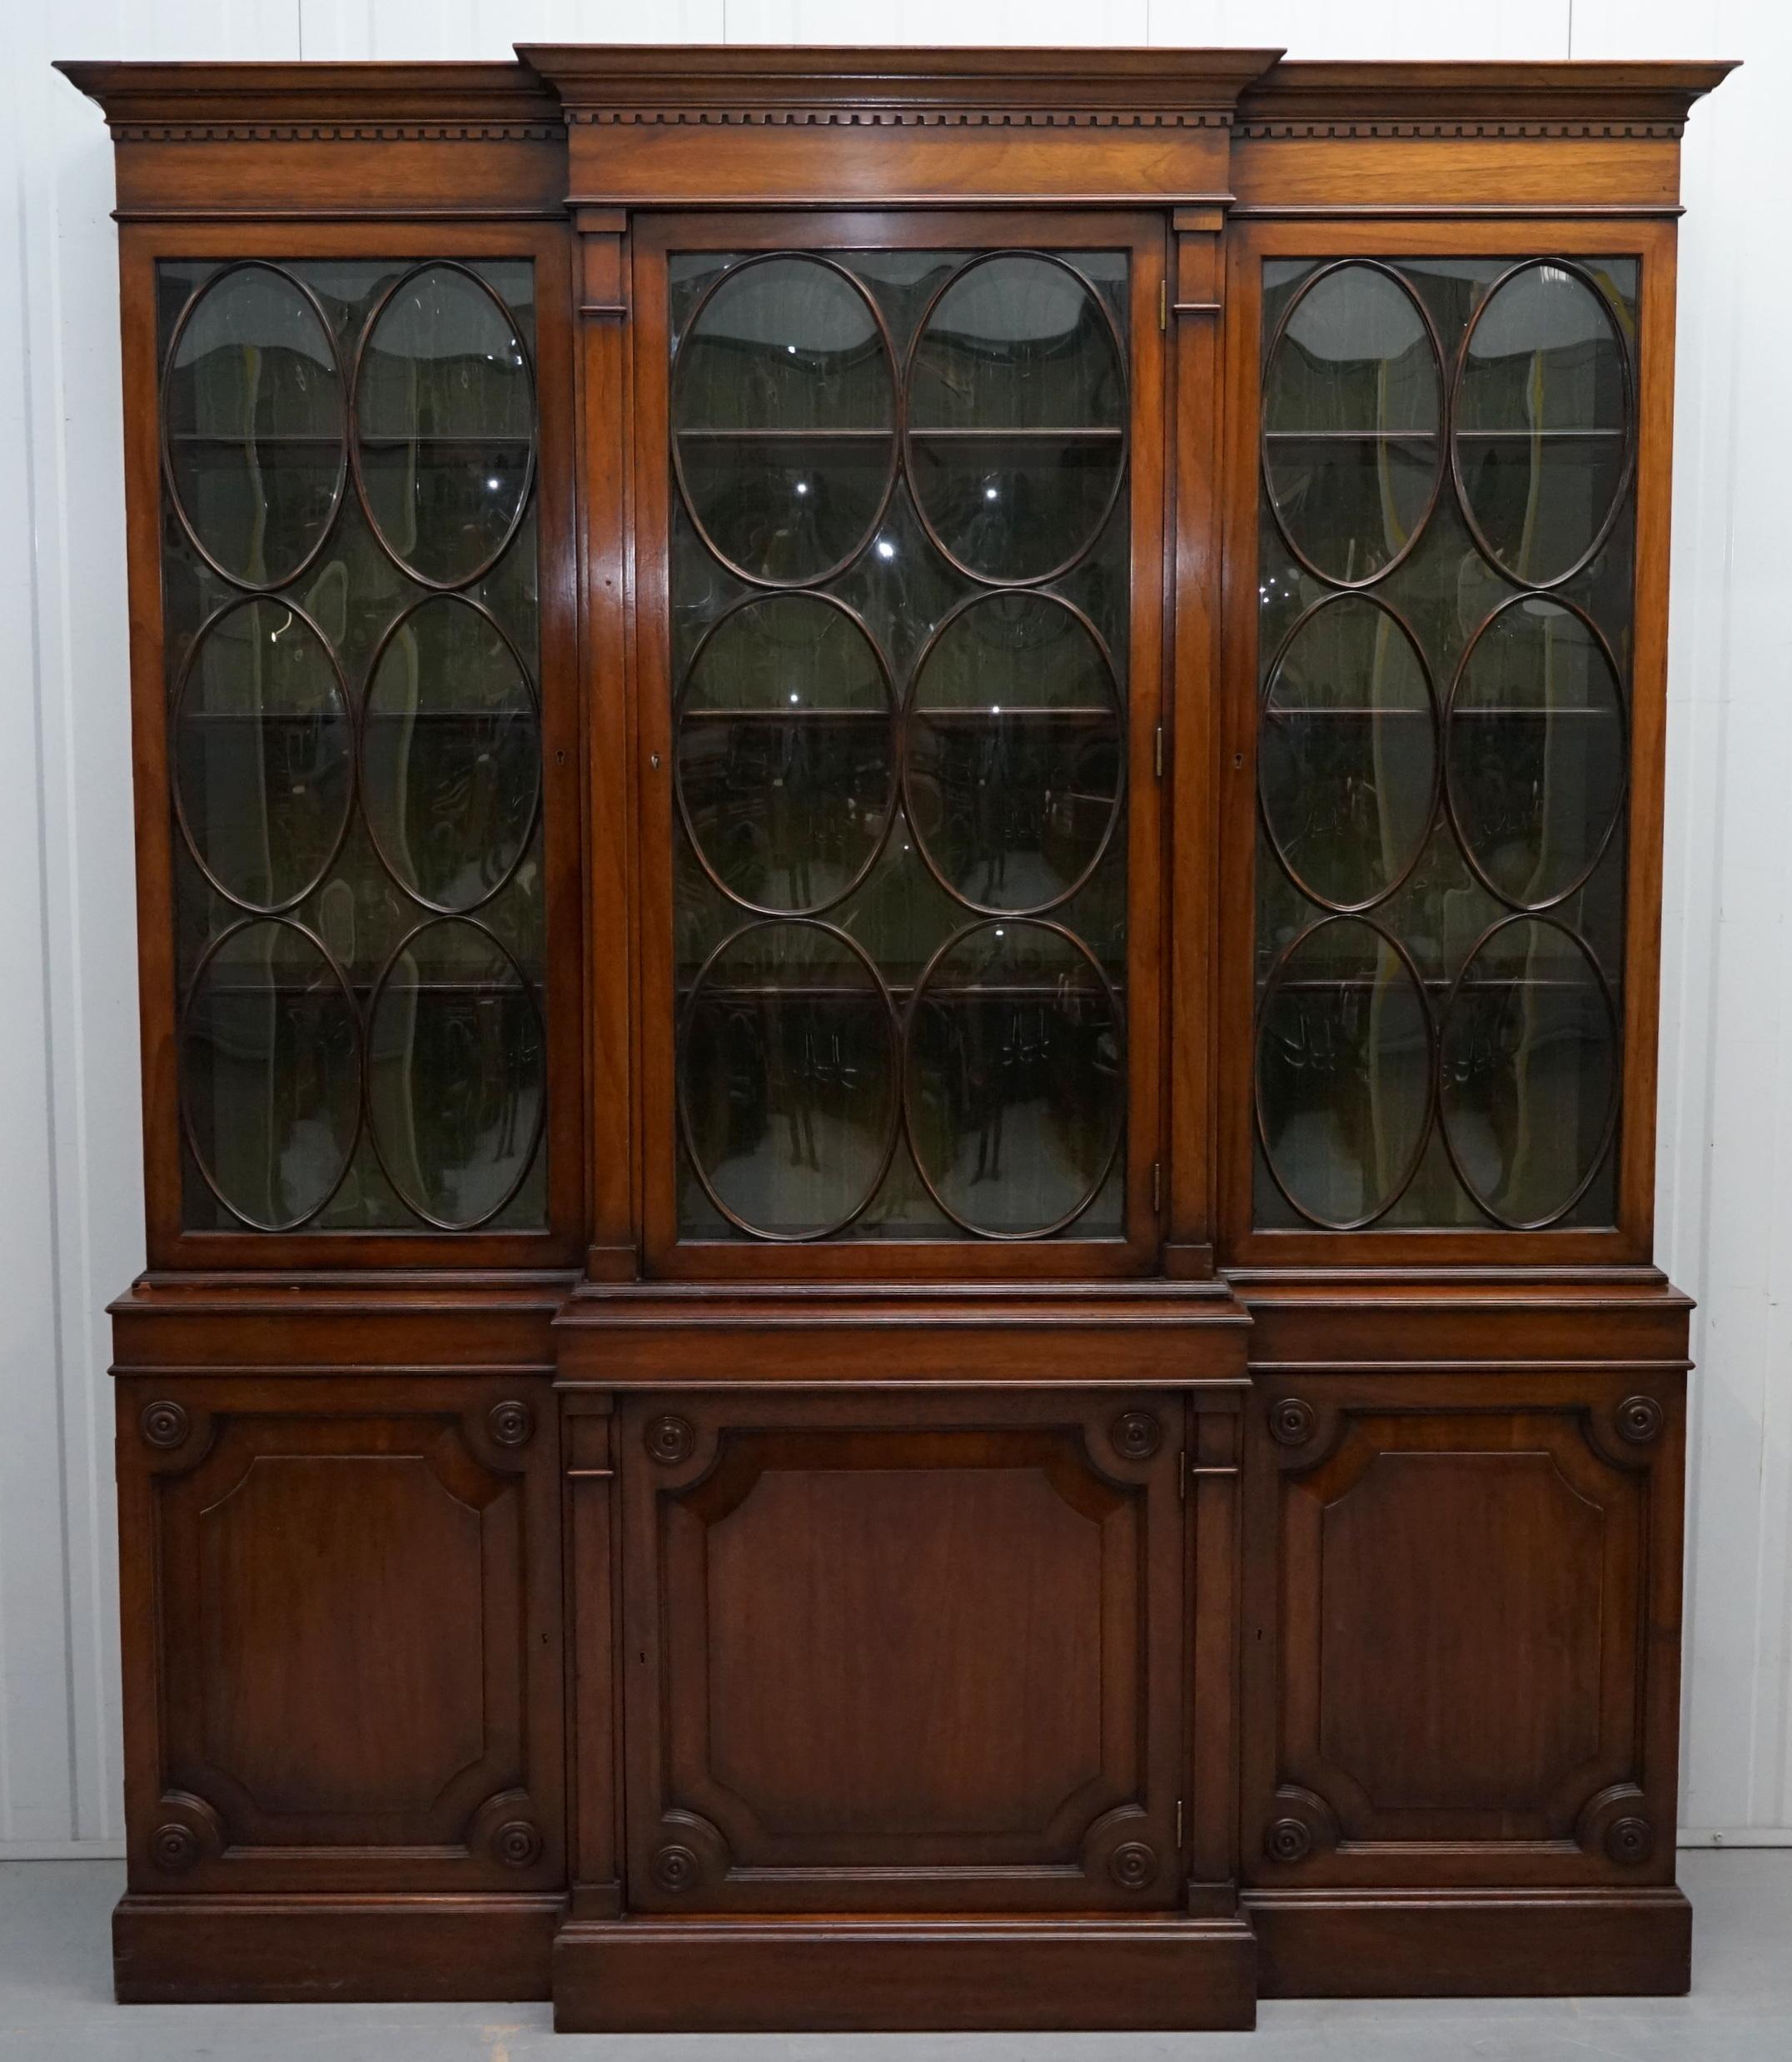 We are delighted to offer for sale this very rare late Georgian to early Victorian breakfront Astral Glazed Library bookcase dresser with domed oval glass

This dresser or library bookcase is exceptionally rare, its Astral glazed which was very